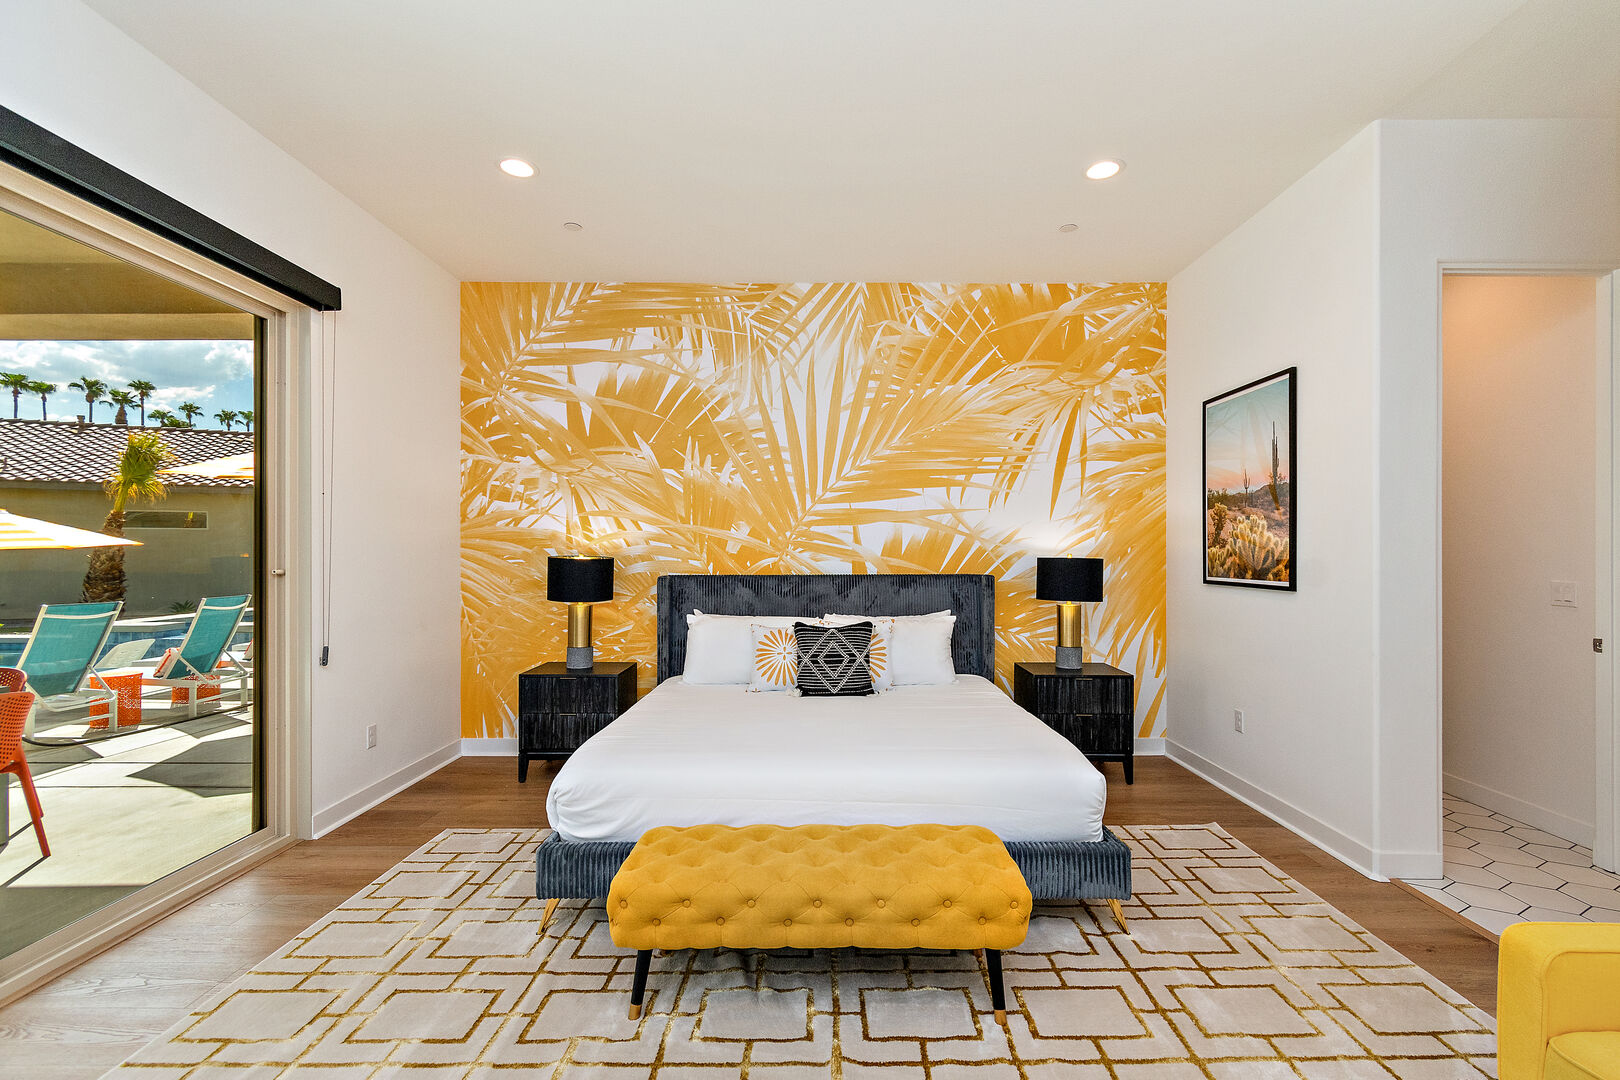 Master Suite 1 is located next to bedroom 2 and features a King-sized Bed with gold accents.